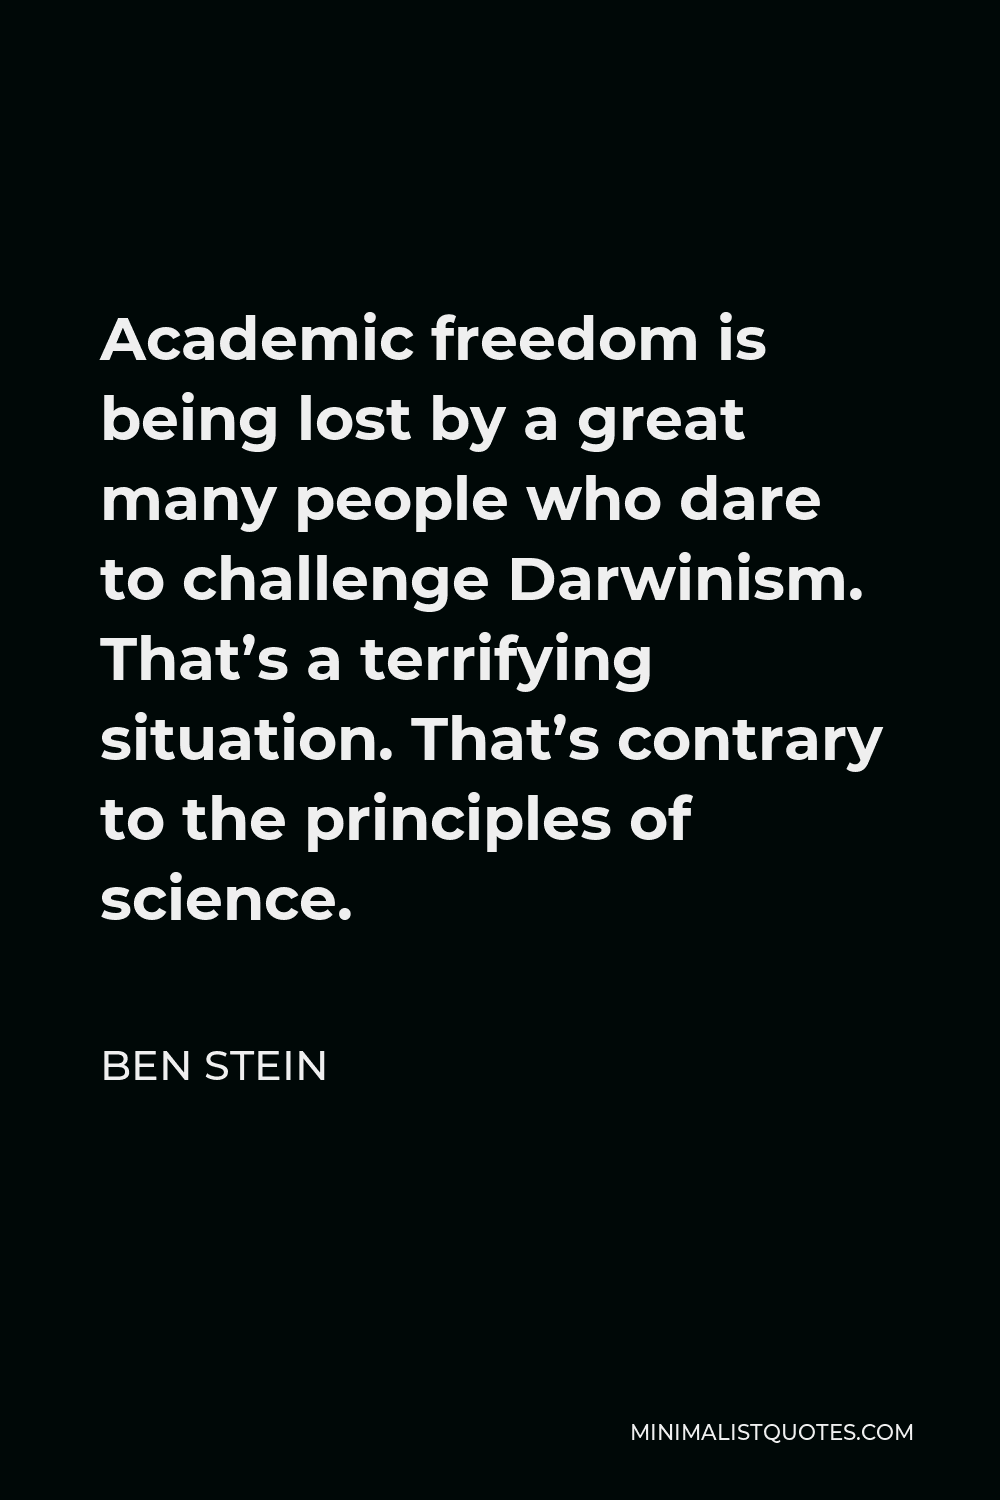 Ben Stein Quote - Academic freedom is being lost by a great many people who dare to challenge Darwinism. That’s a terrifying situation. That’s contrary to the principles of science.